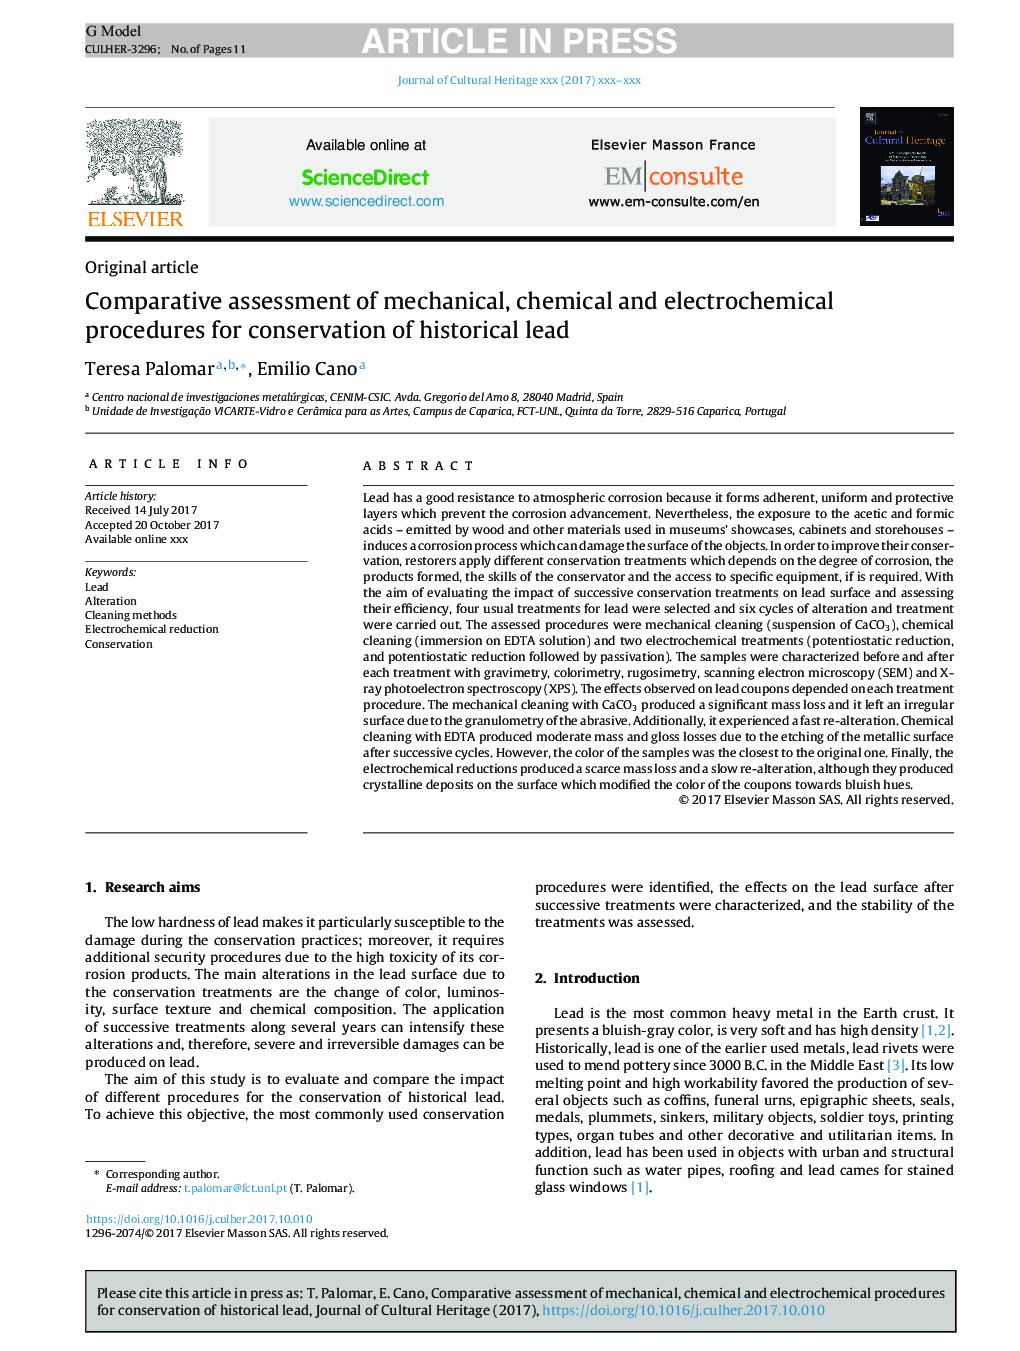 Comparative assessment of mechanical, chemical and electrochemical procedures for conservation of historical lead